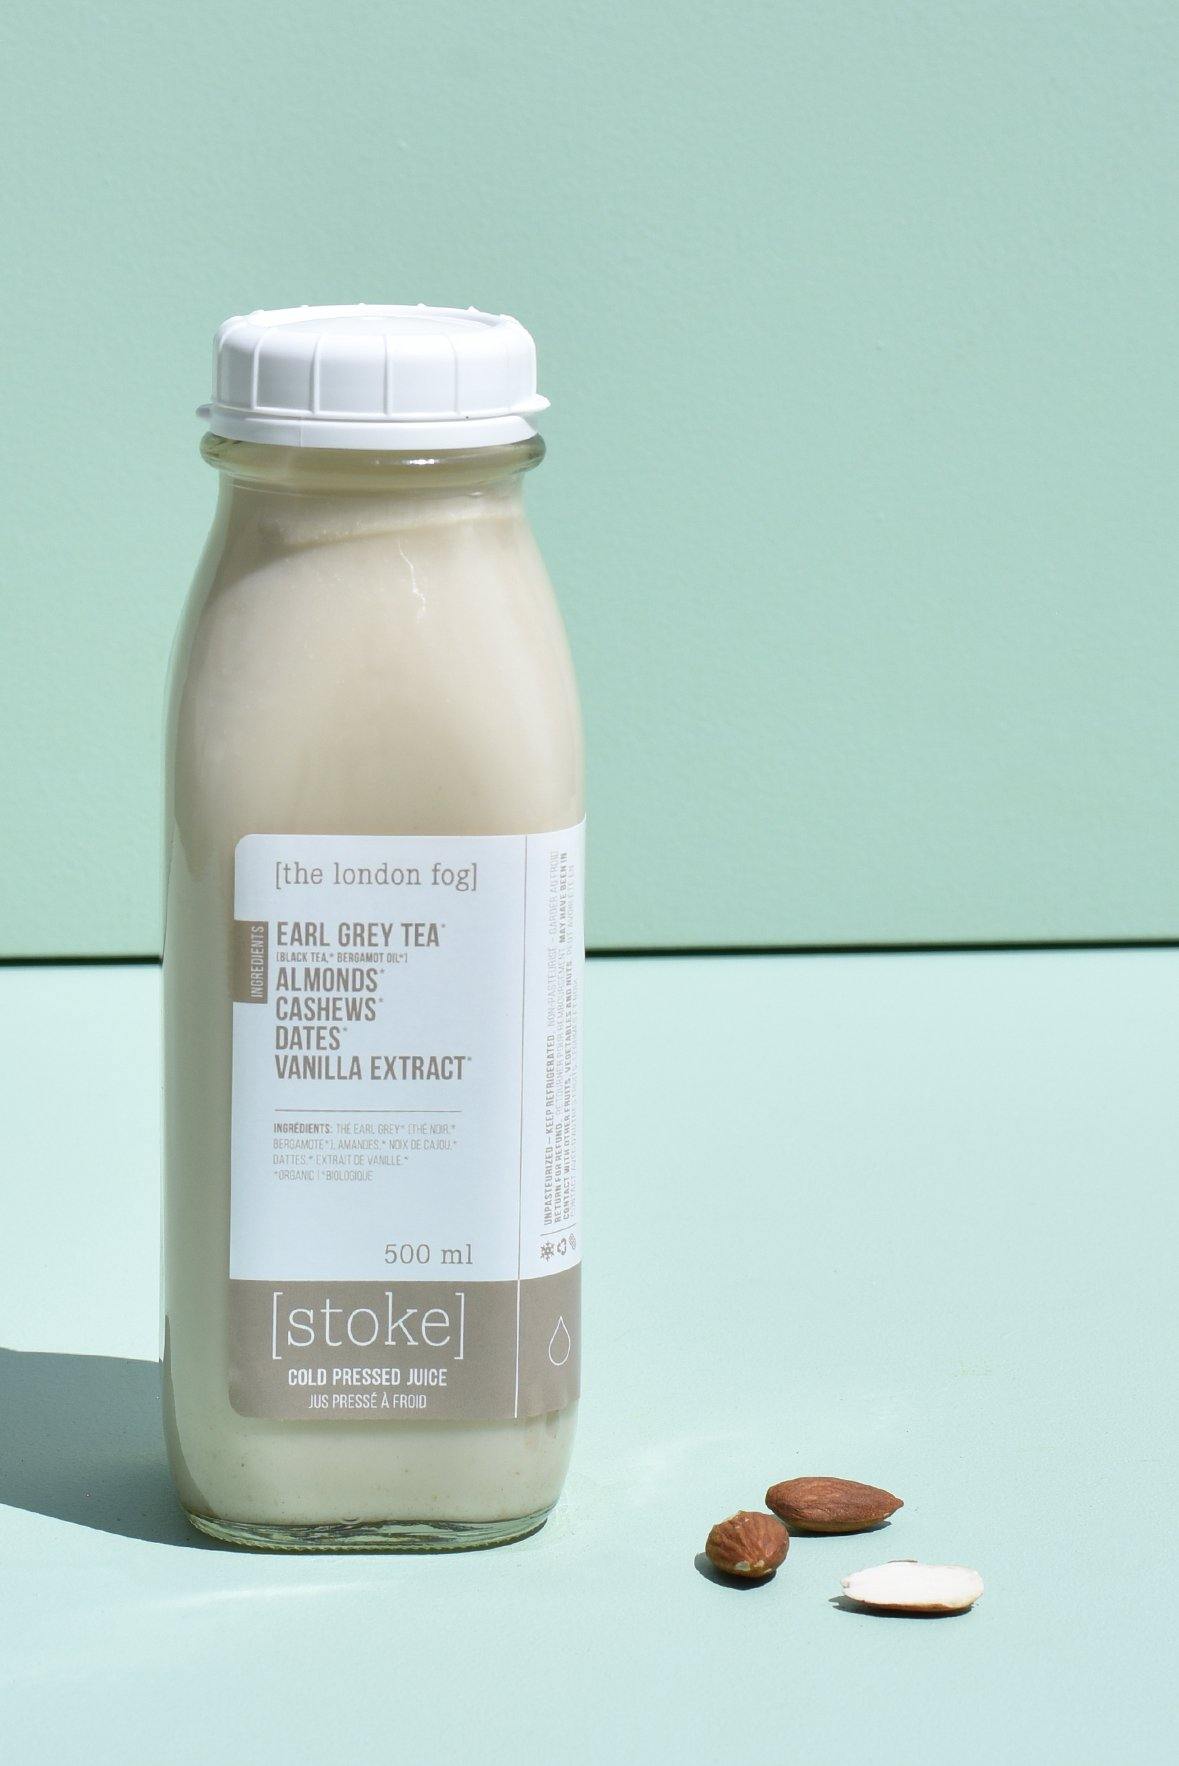 [ the london fog ] cold pressed juice - nut milk - with earl grey tea, dates and vanilla extract